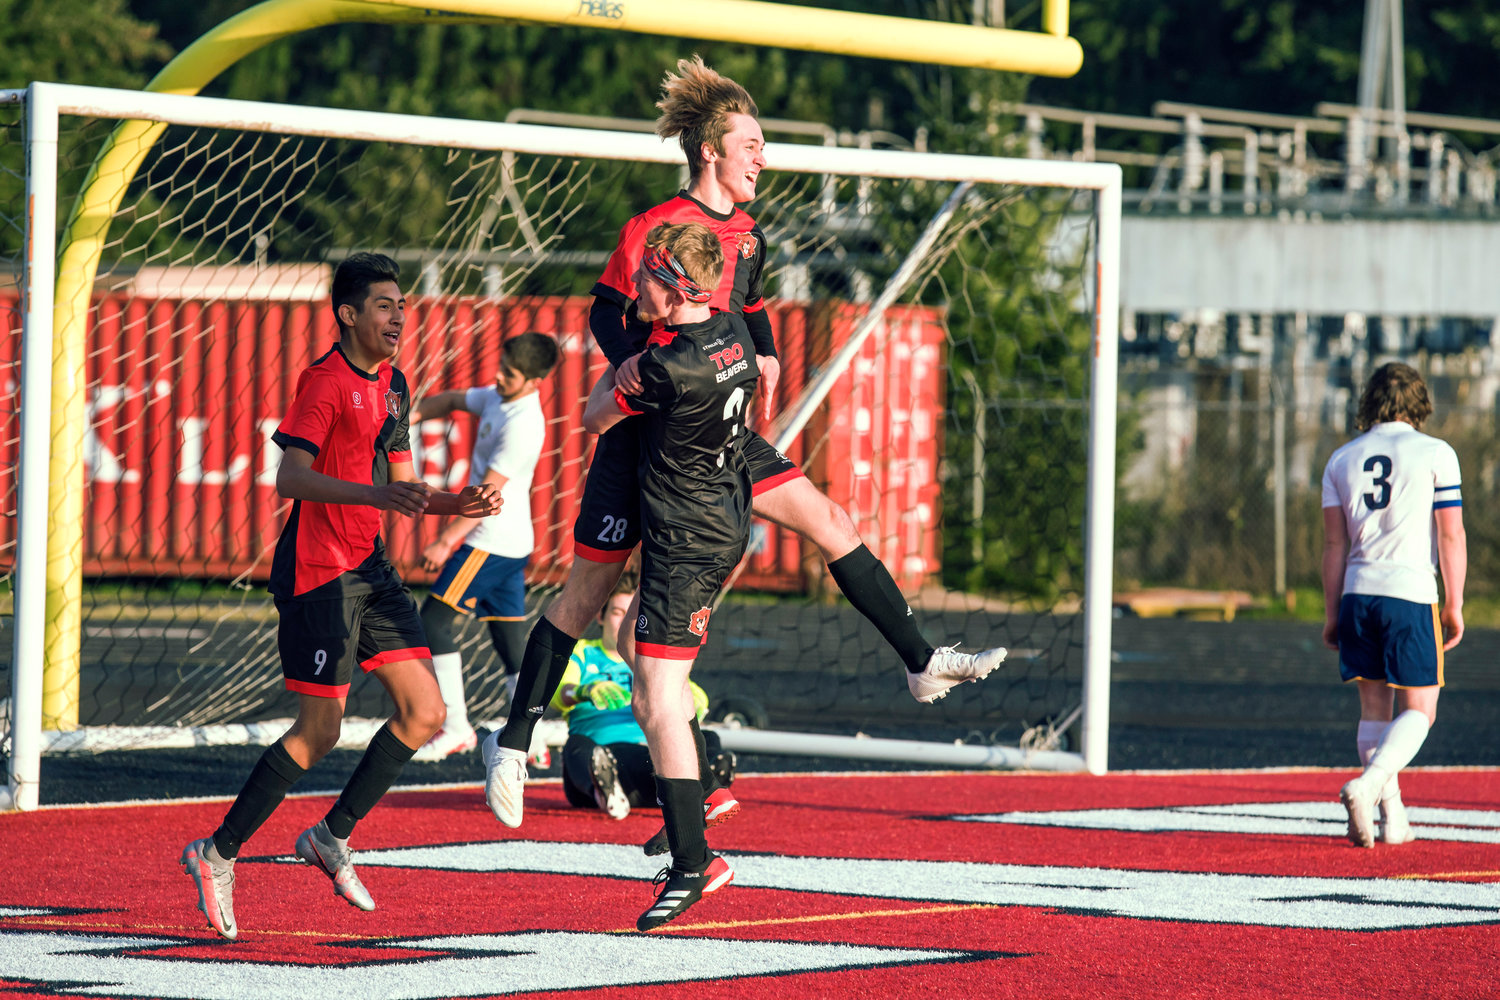 Tenino's Triston Whitaker (28) celebrates a goal during a game against Forks on Friday at Beaver Stadium.